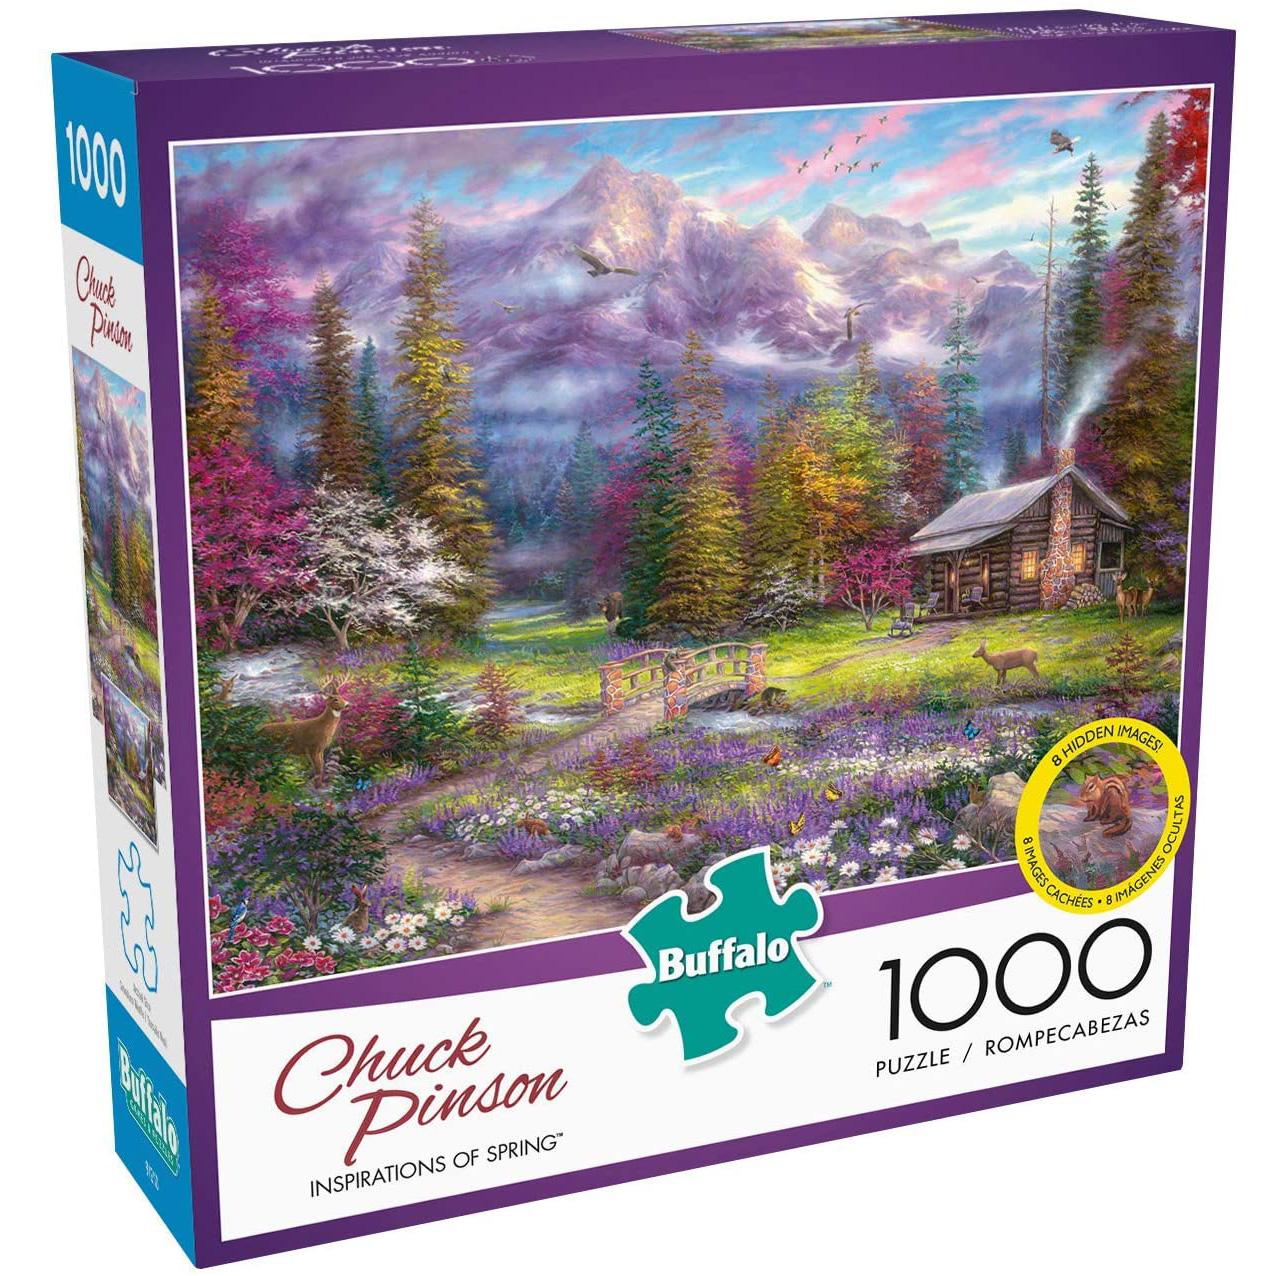 1000-Piece Buffalo Games Jigsaw Puzzles for $9.97